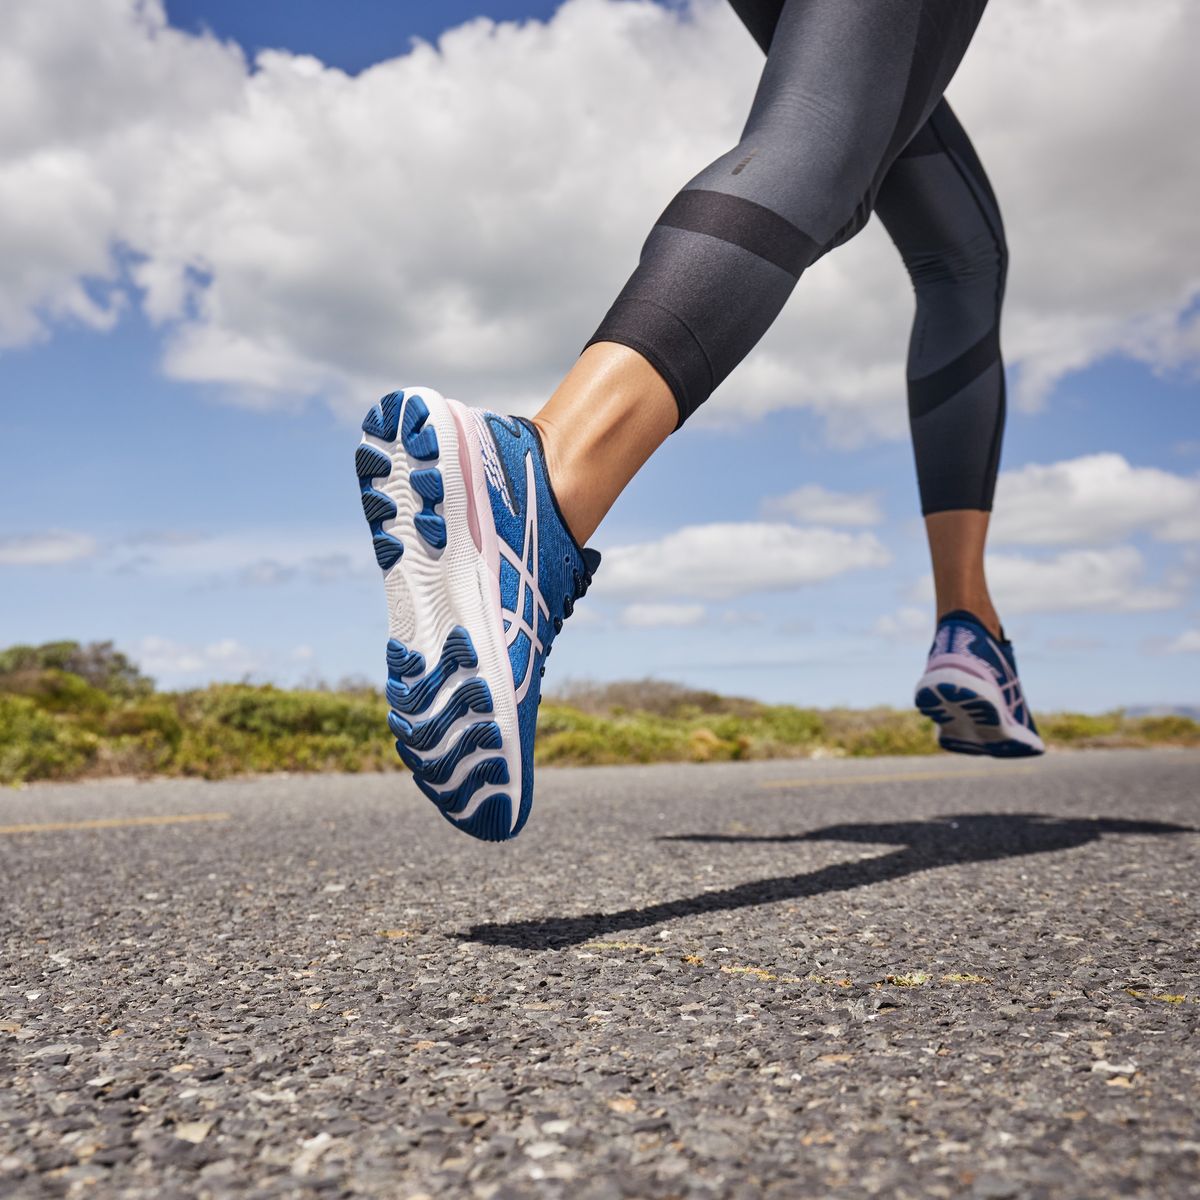 Wide fit trainers: 6 of the best for running